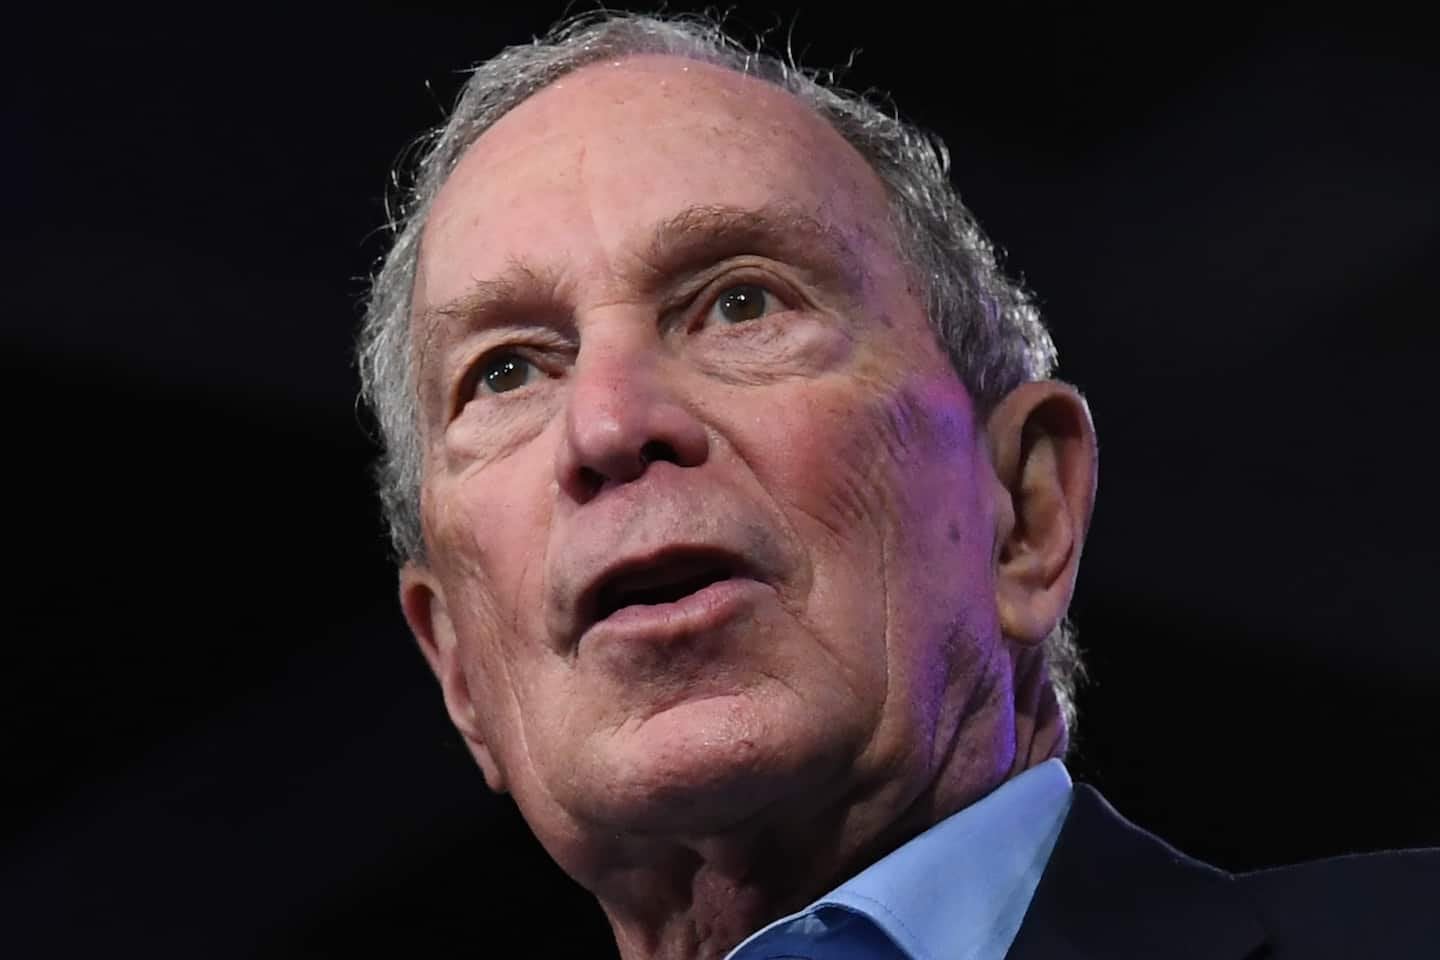 Bloomberg Pumps Big Money Into Low-Profile State Races To Boost Climate Policies | Subscrb - Get The Best Malaysia Magazine Subscriptions On Subscrb.com